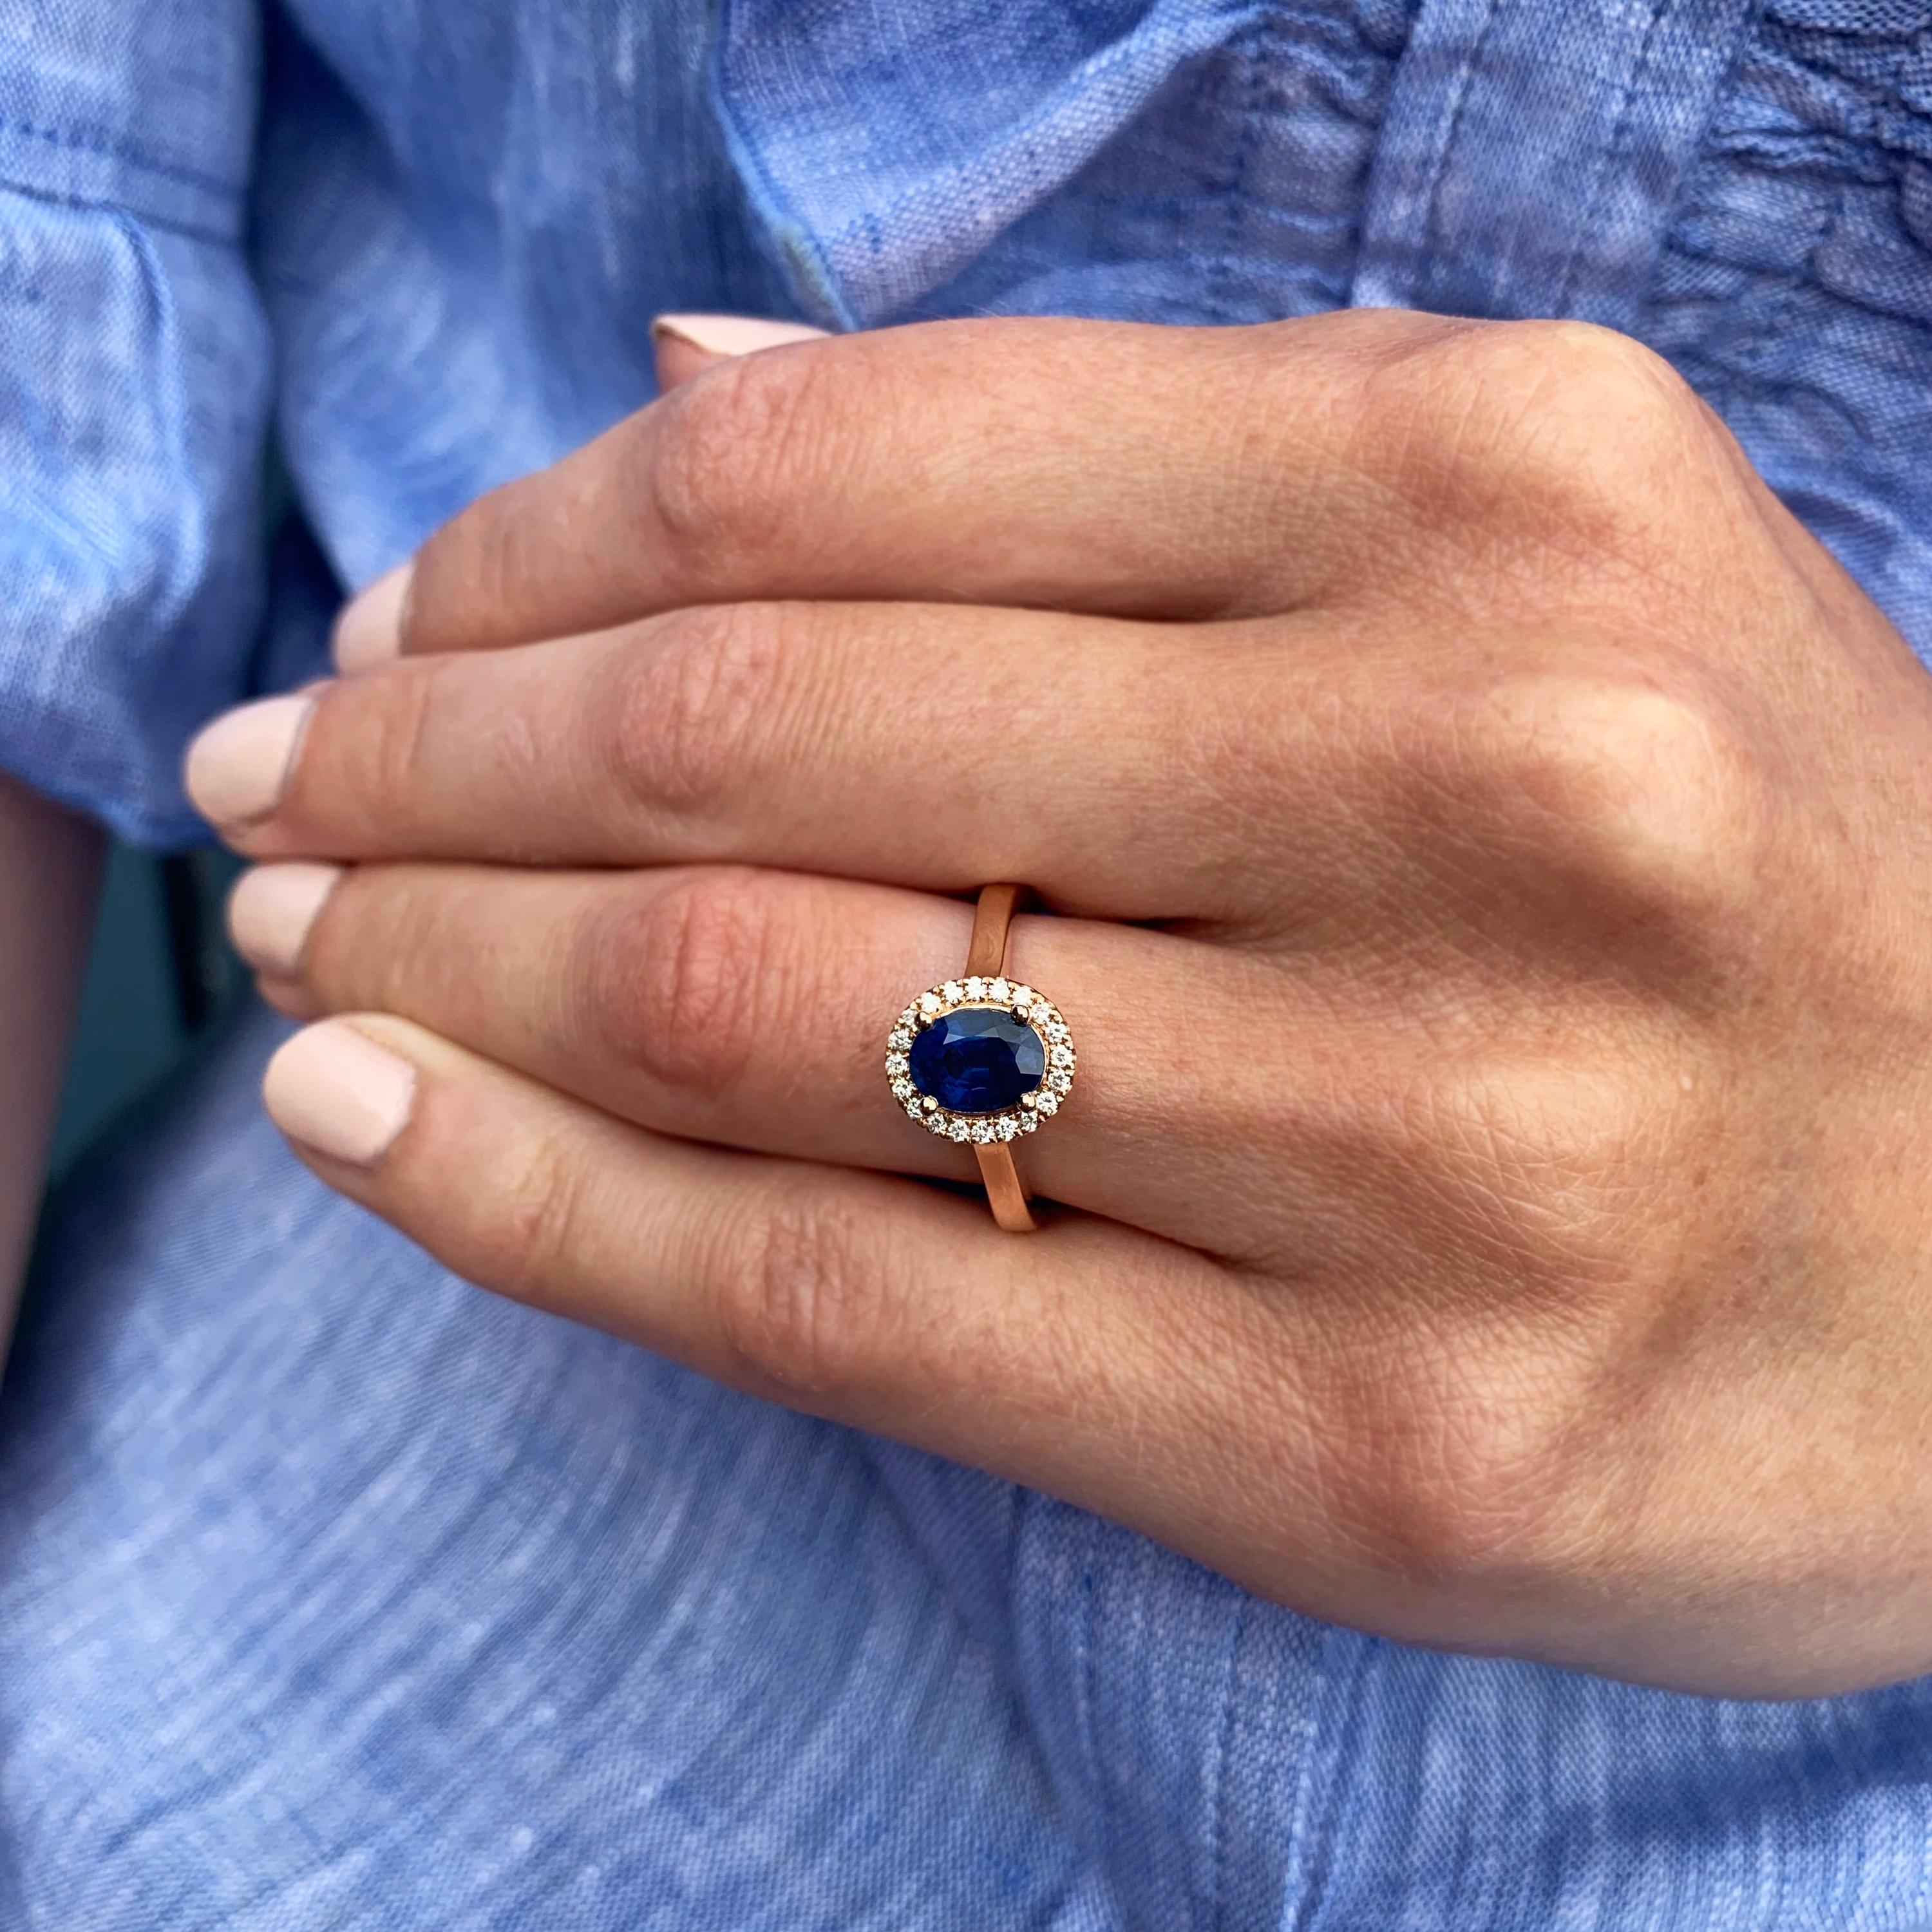 blue sapphire rose gold engagement rings